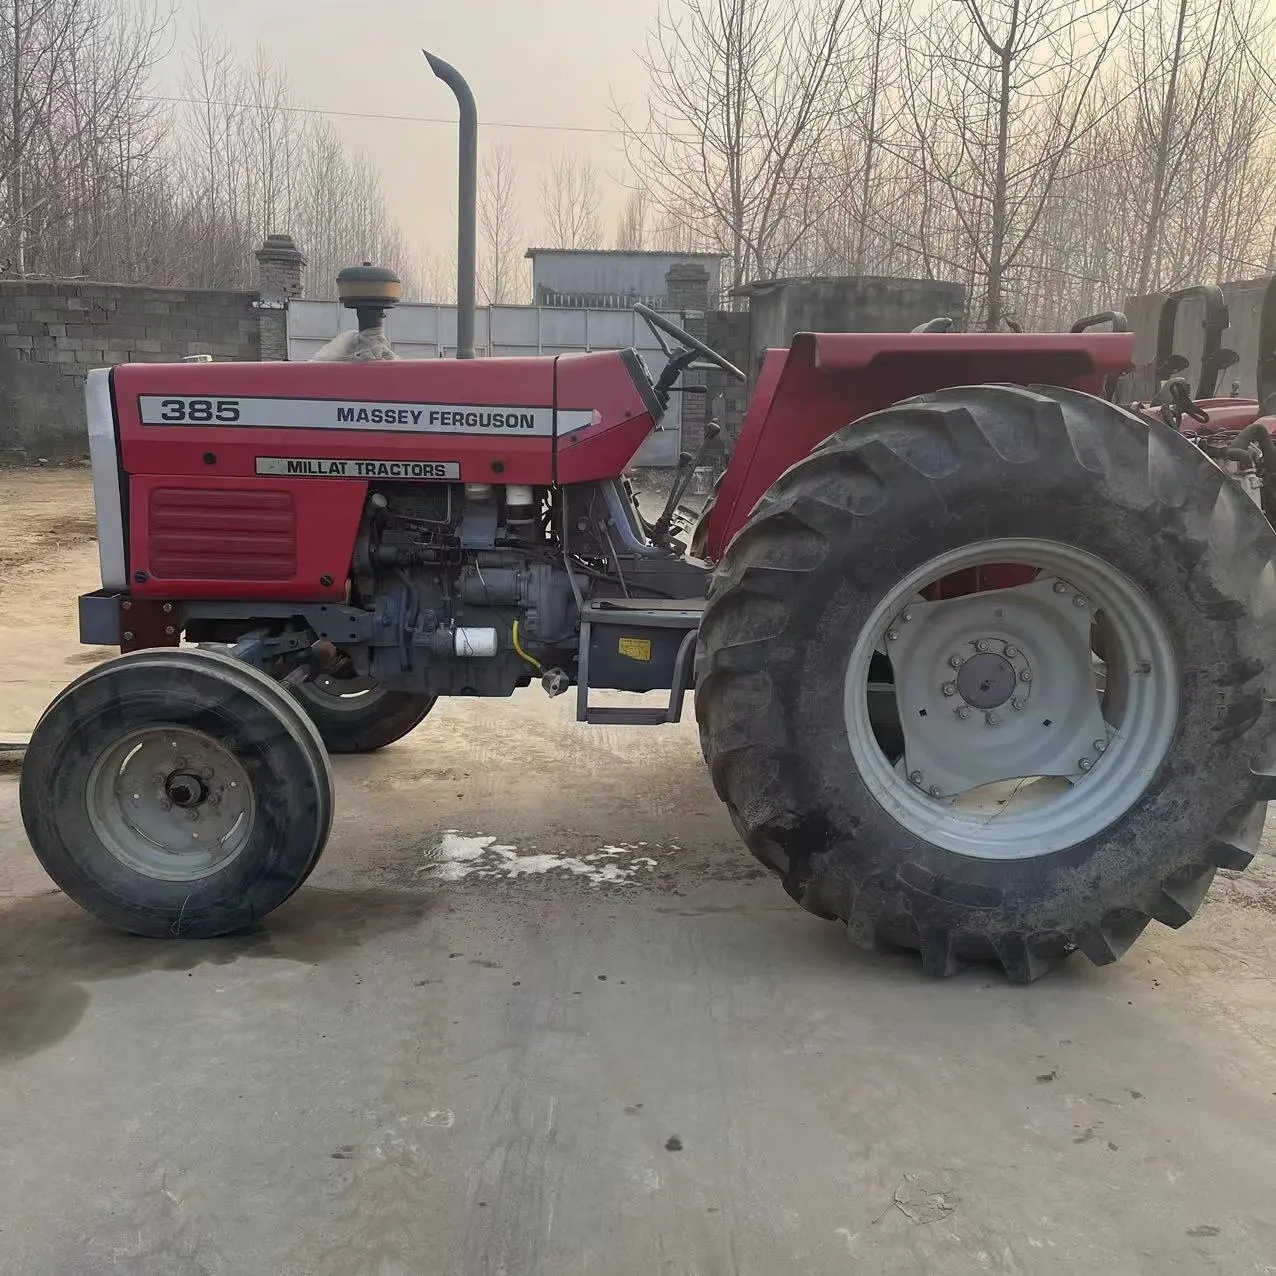 FARM USED 2wd stylish and classic MF385 tractor 85hp for sales with reasonable prices with attachments disc plough